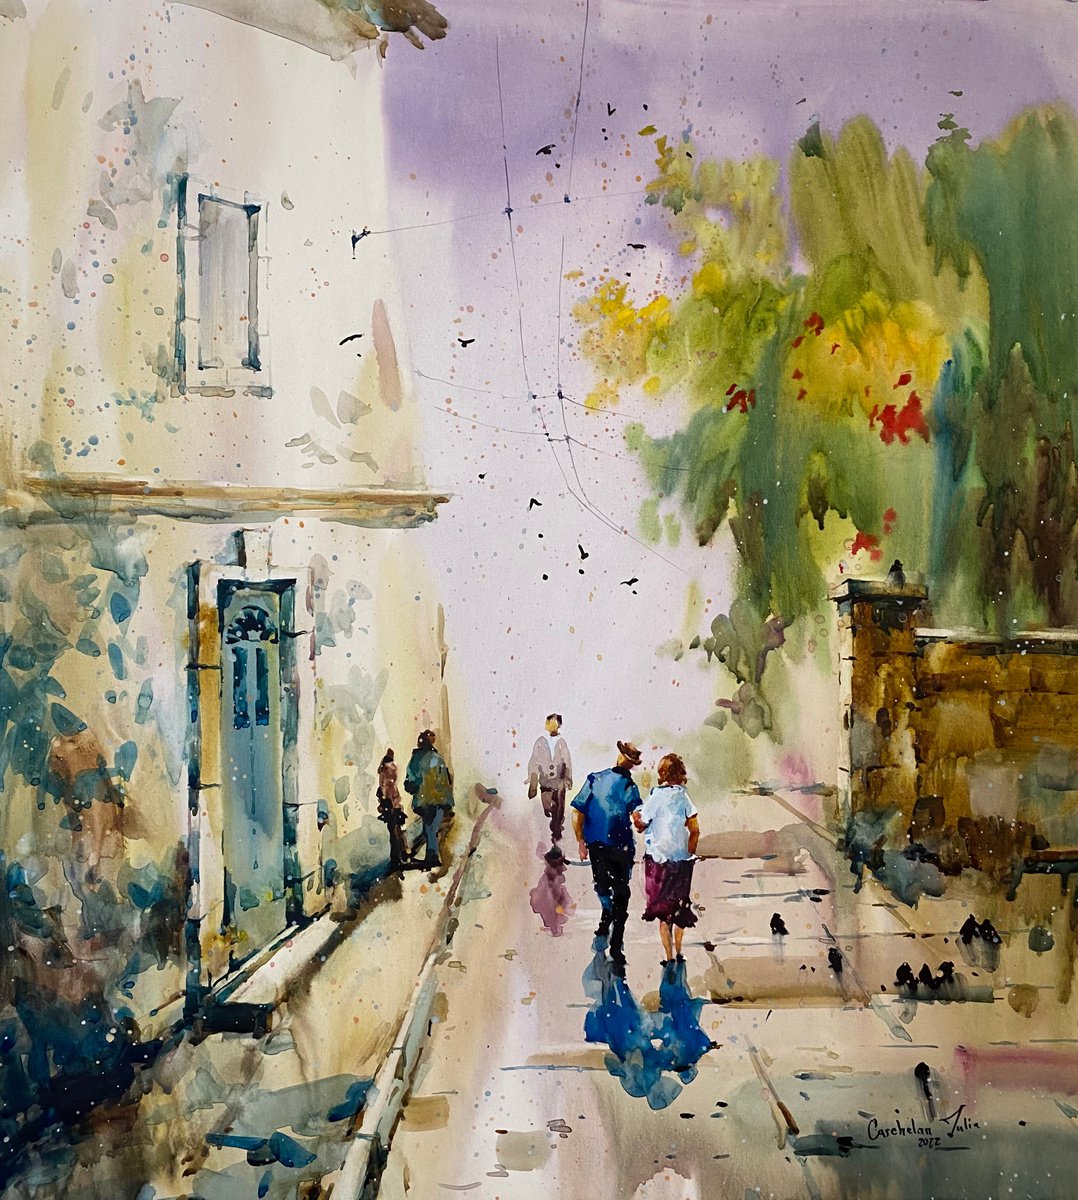 Watercolor -Lifetime Love-? perfect gift by Iulia Carchelan